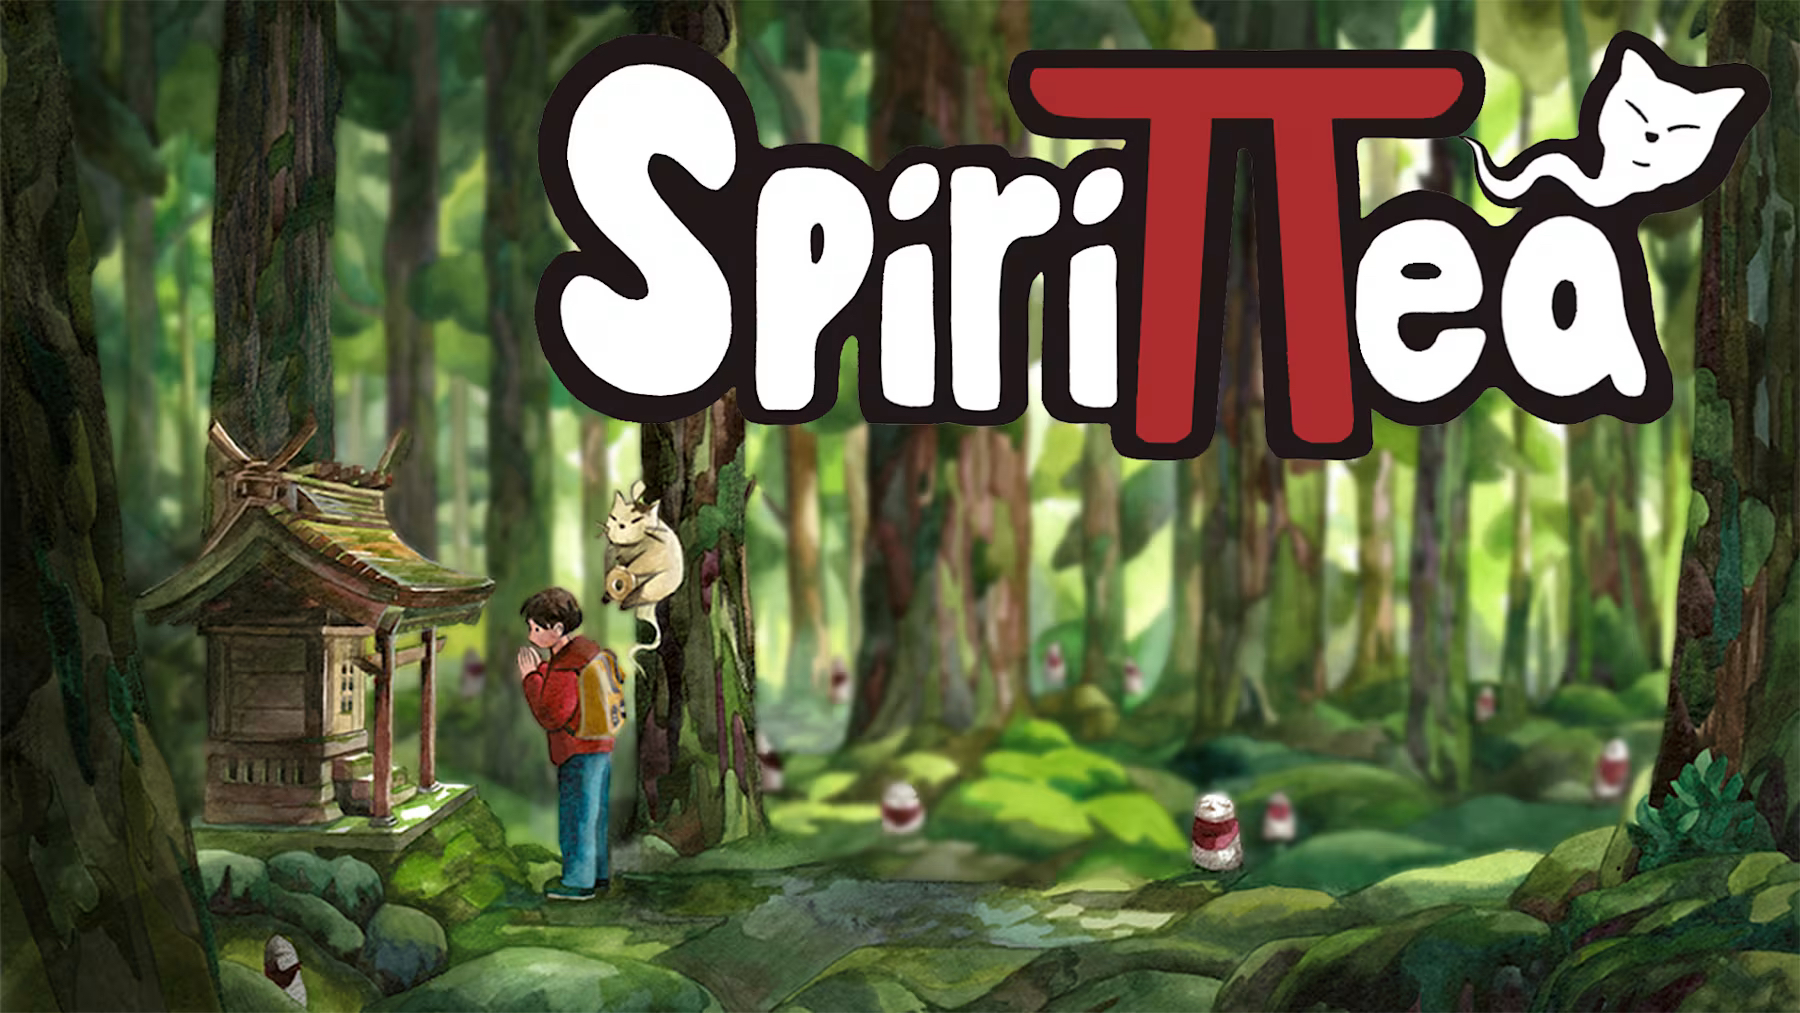 Reviews Featuring ‘Spirittea’ and ‘Salt & Sacrifice’, Plus the Latest Releases, News, and Sales – TouchArcade